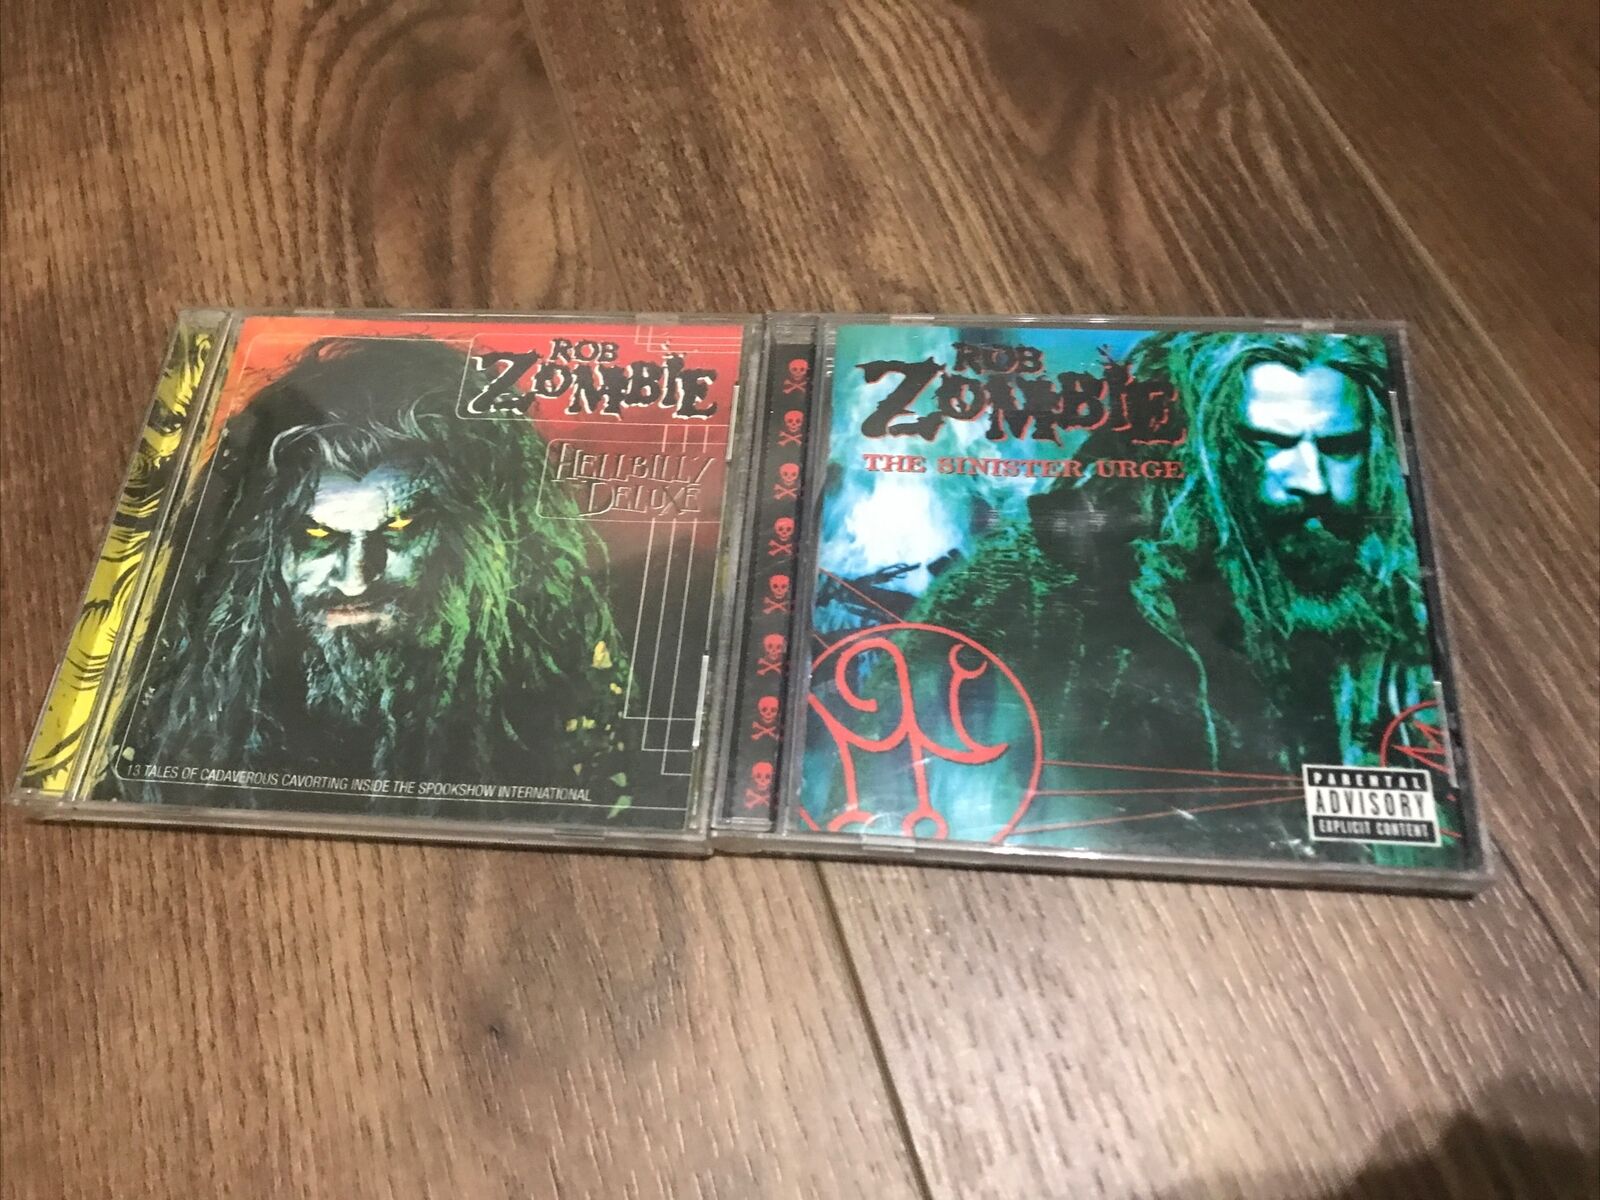 Rob Zombie Lot Of 2 CDs